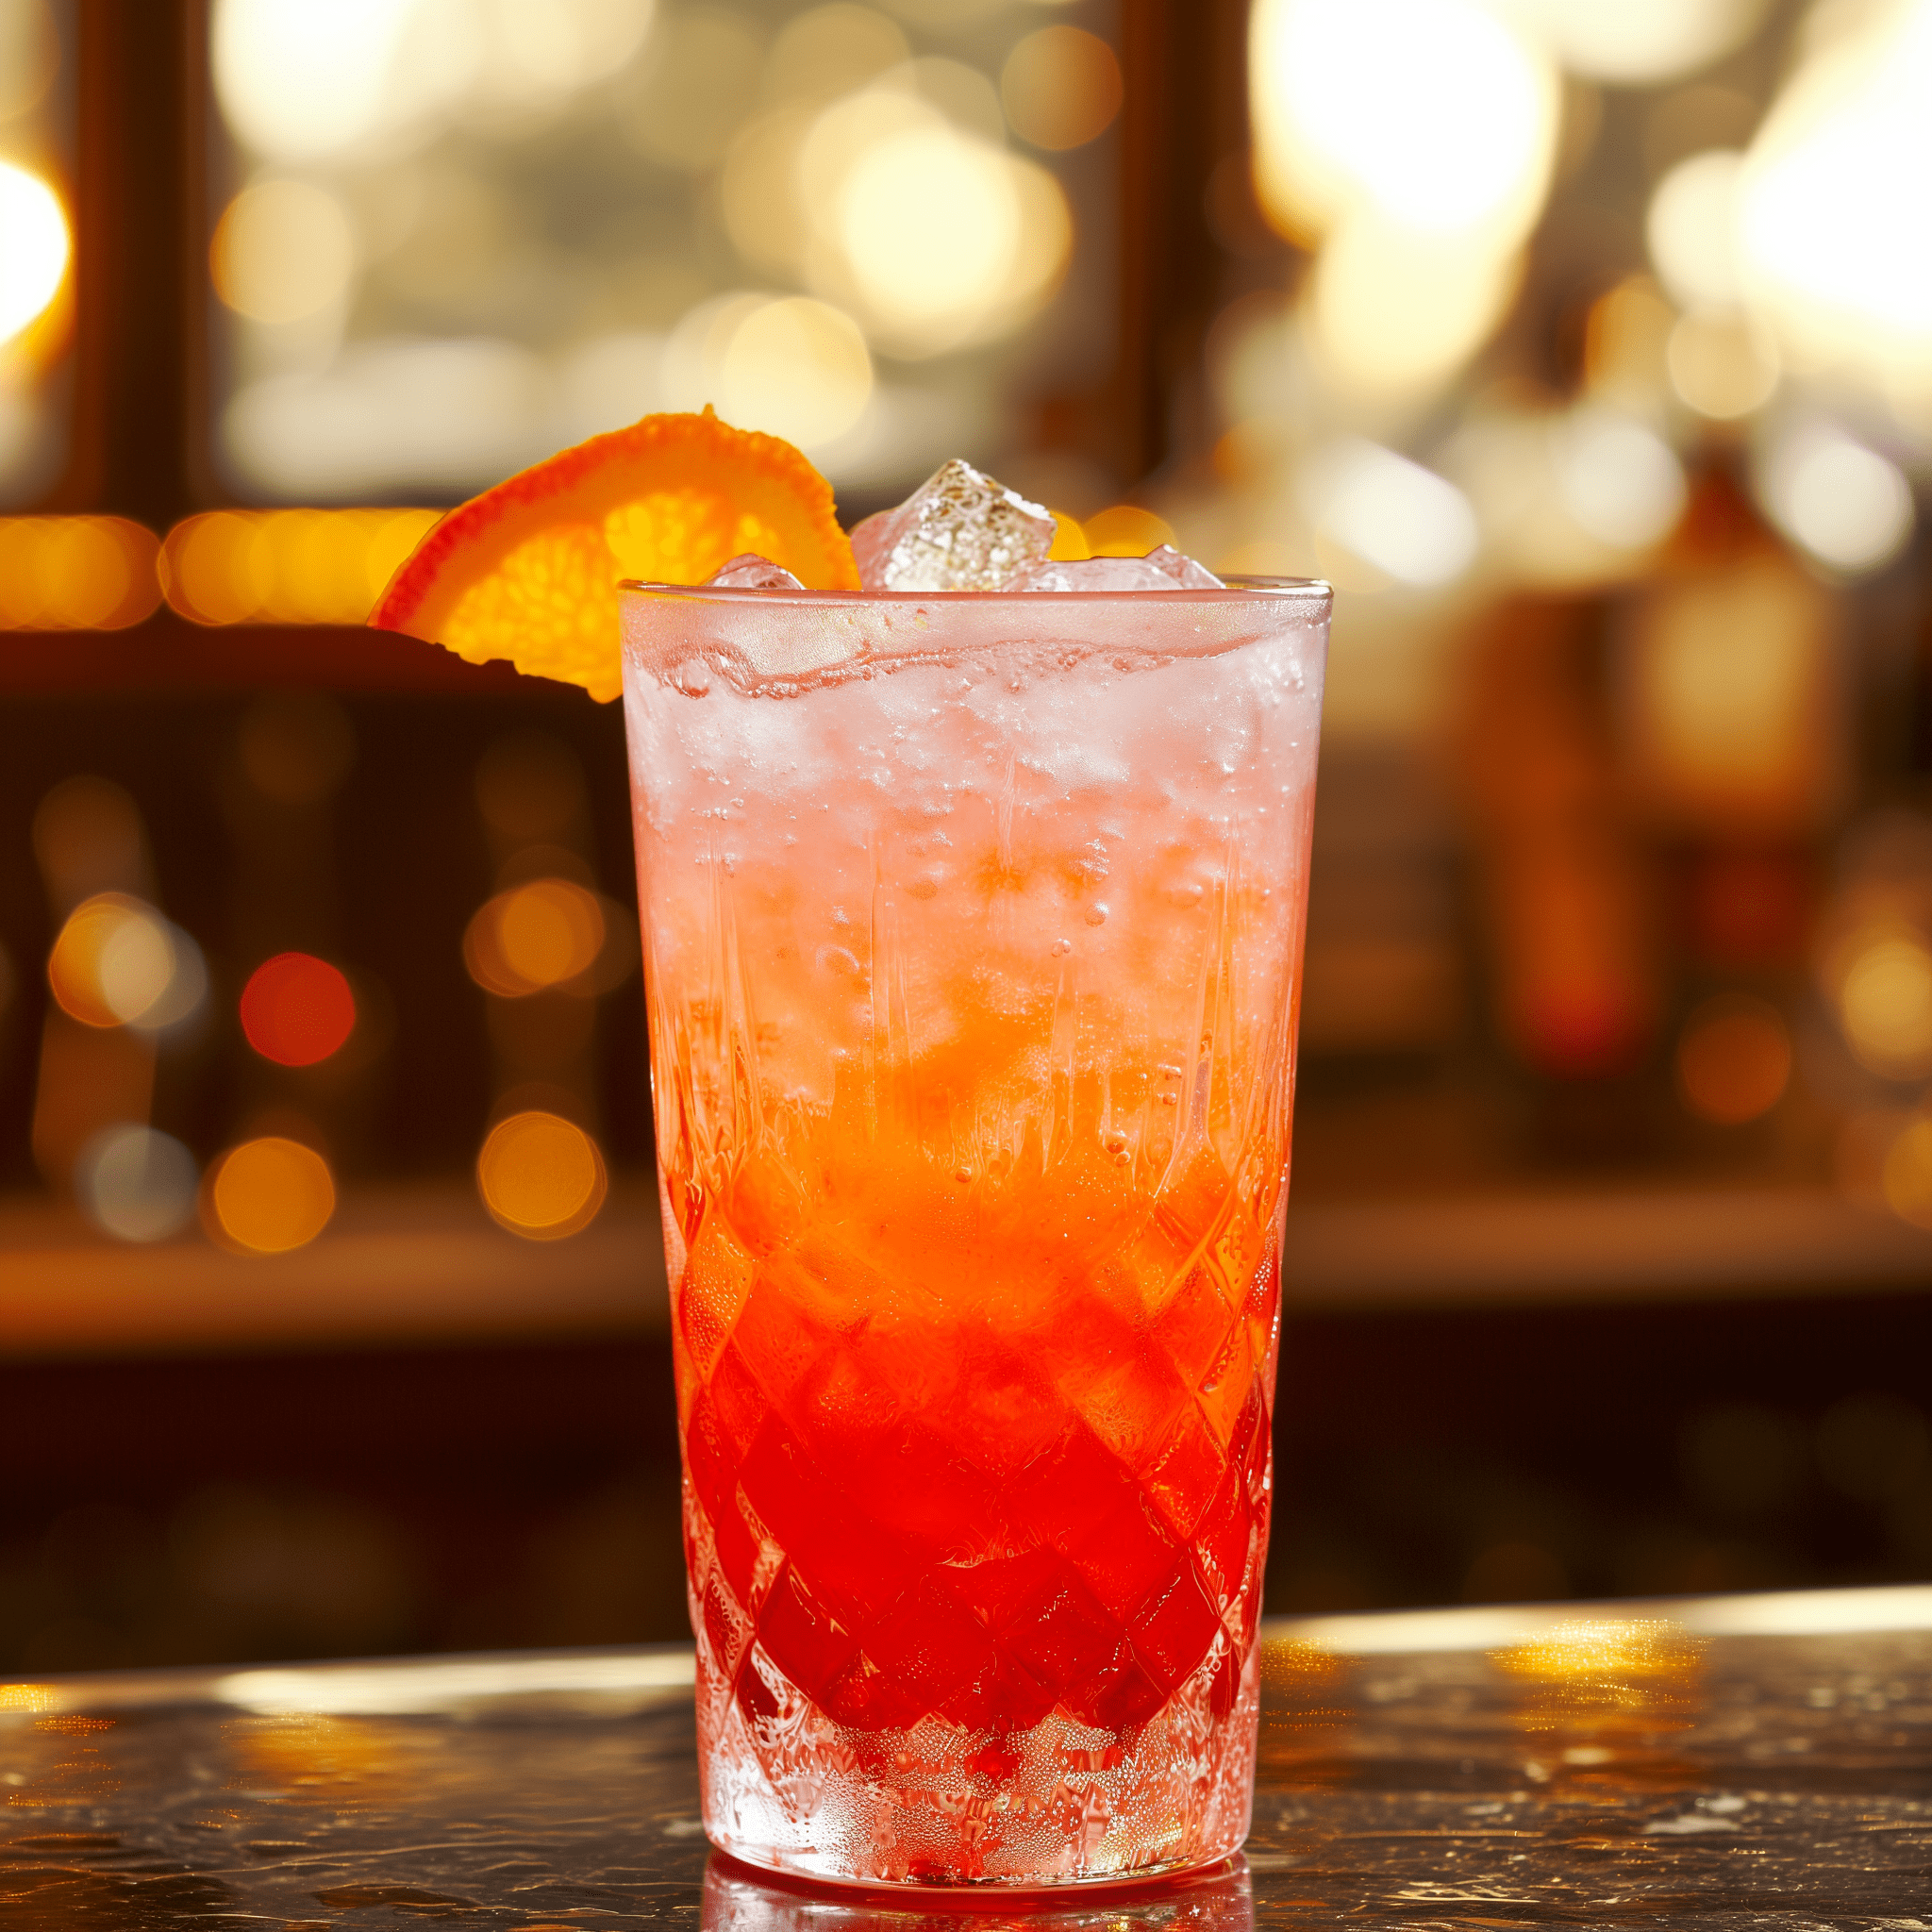 The Garibaldi cocktail offers a bittersweet taste with a tangy citrus kick. The Campari provides a herbal bitterness that is perfectly balanced by the fresh, sweet and slightly tart flavor of the orange juice.